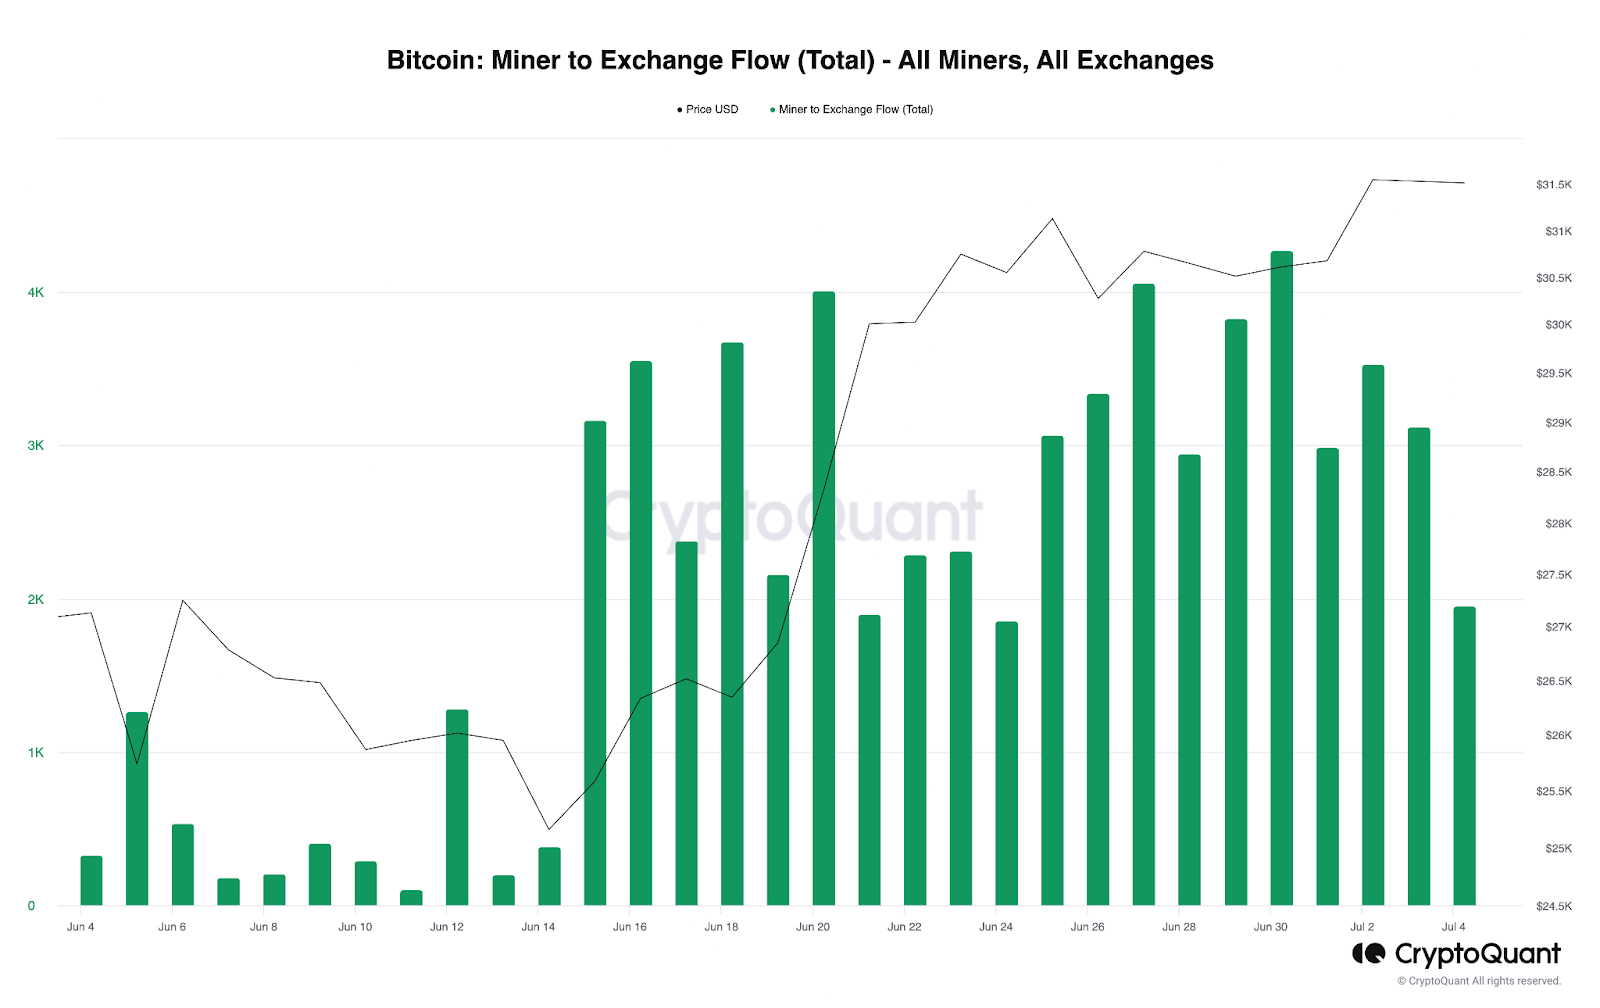 Bitcoin miner to exchange flow chart for the past 30 days